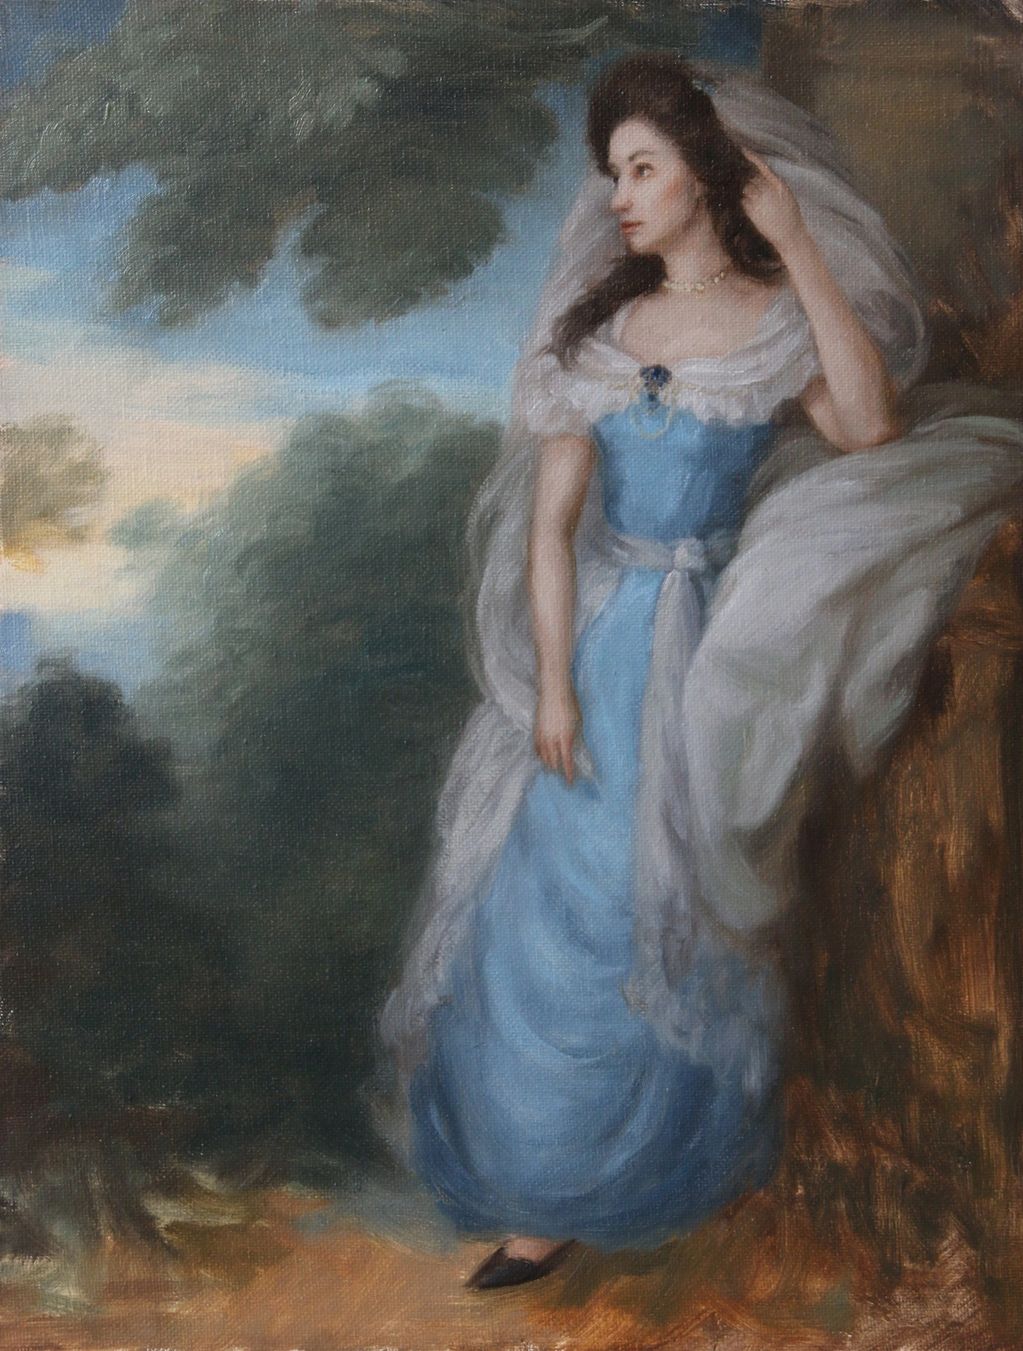 Woman in blue and white dress